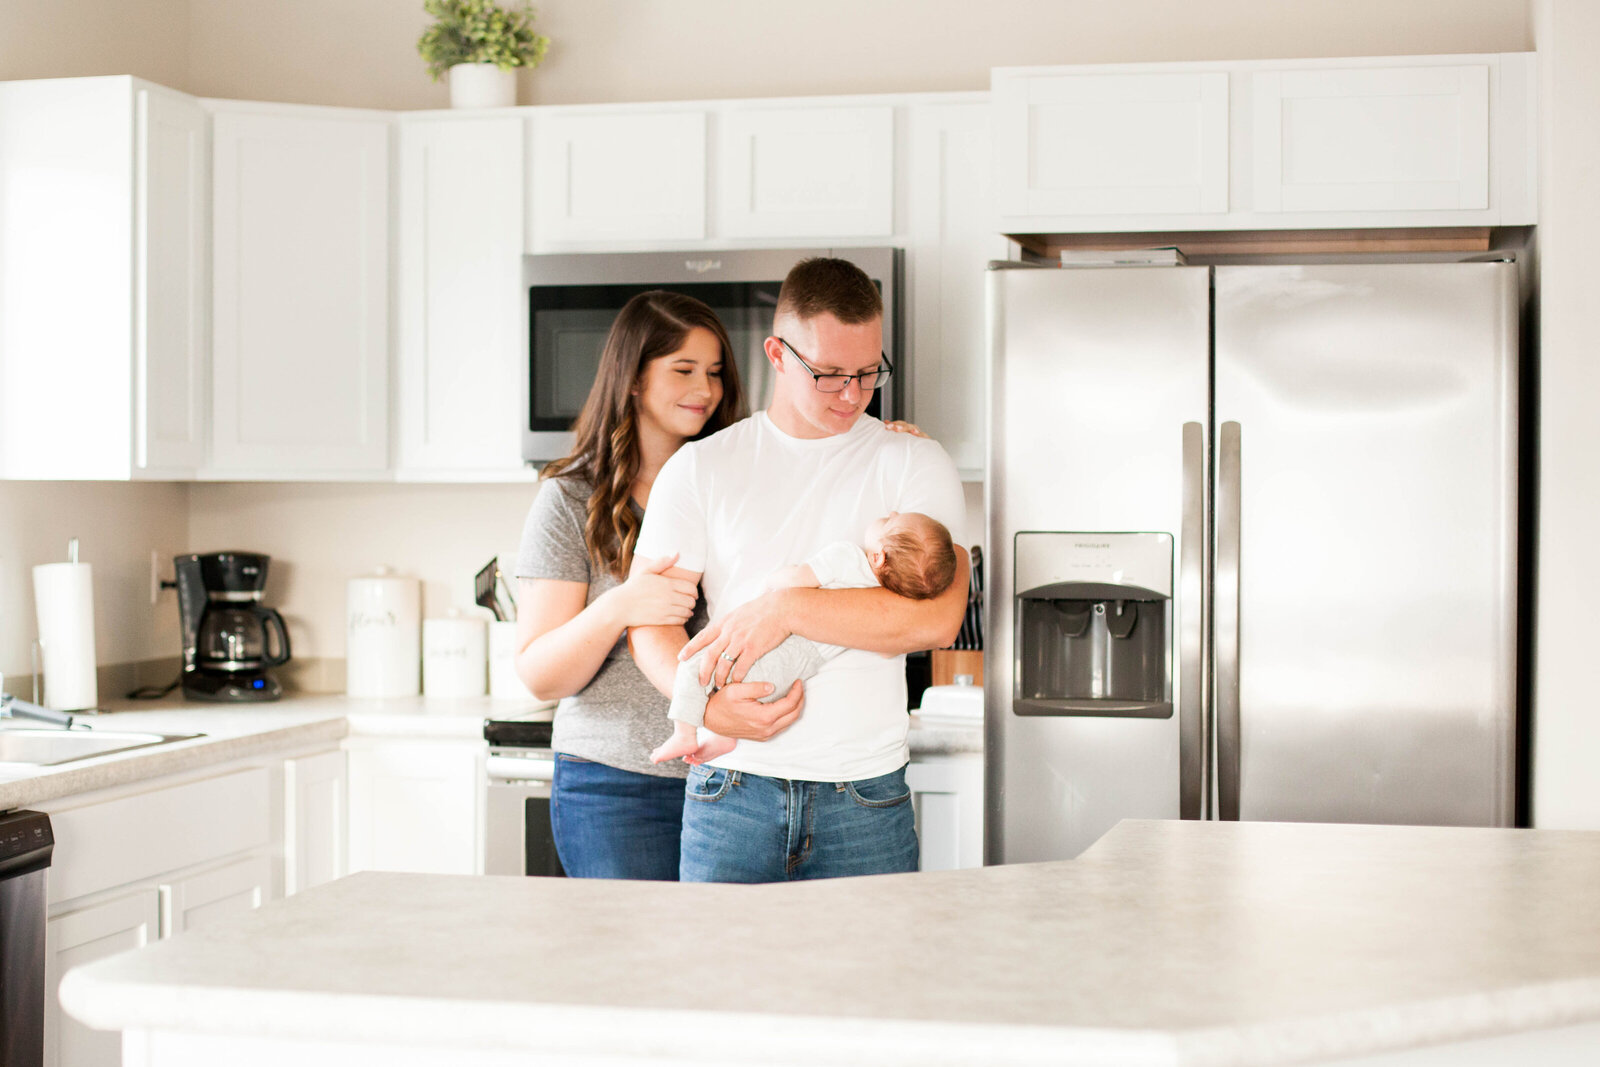 A lifestyle family photography session featuring a young family in their modern kitchen.